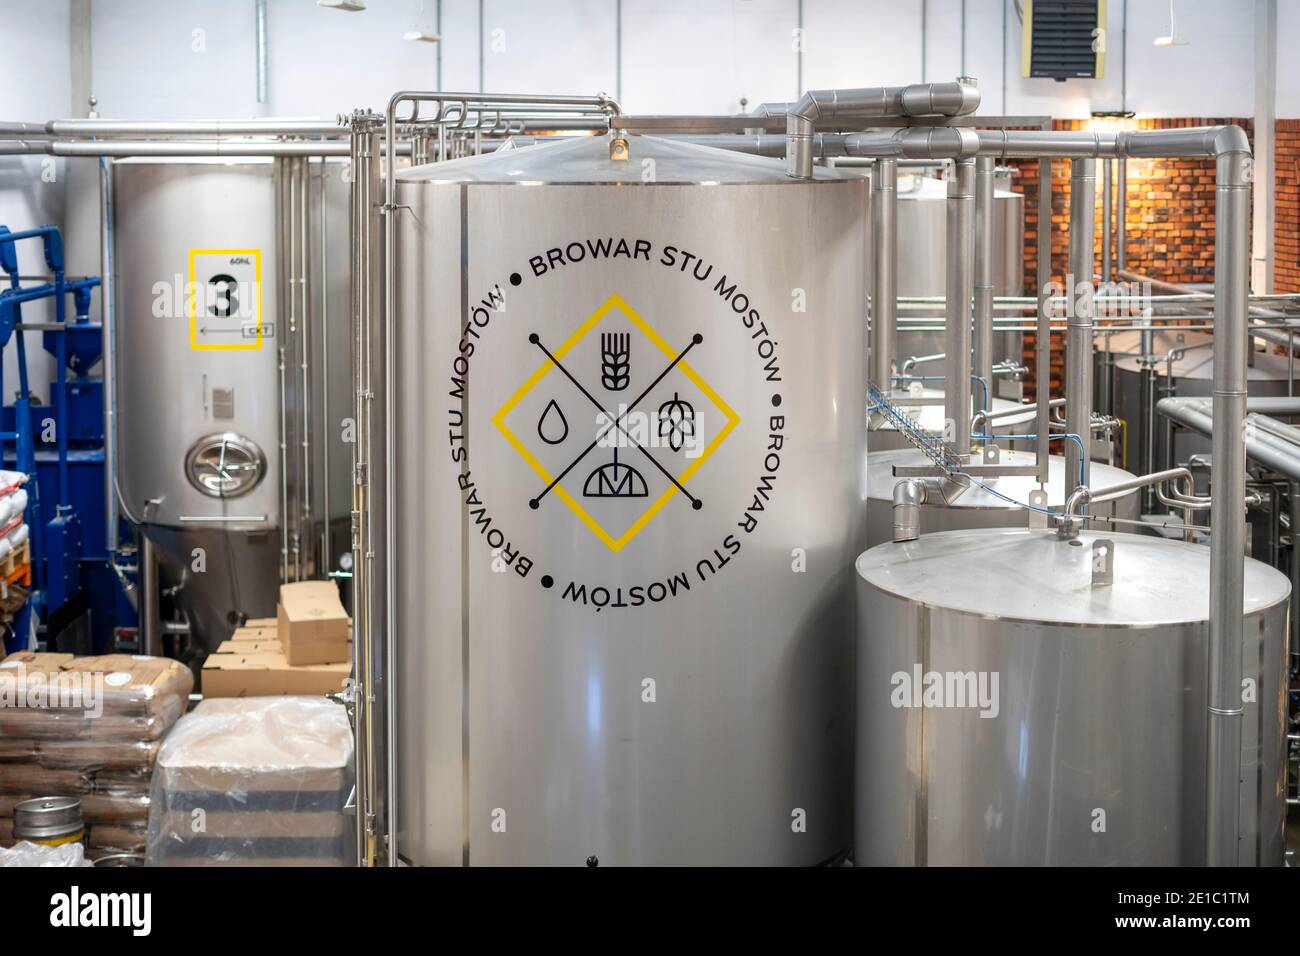 Wroclaw, Poland - July 22, 2020: Tanks full of beer in Browar Stu Mostów Brewery in center of the city Stock Photo